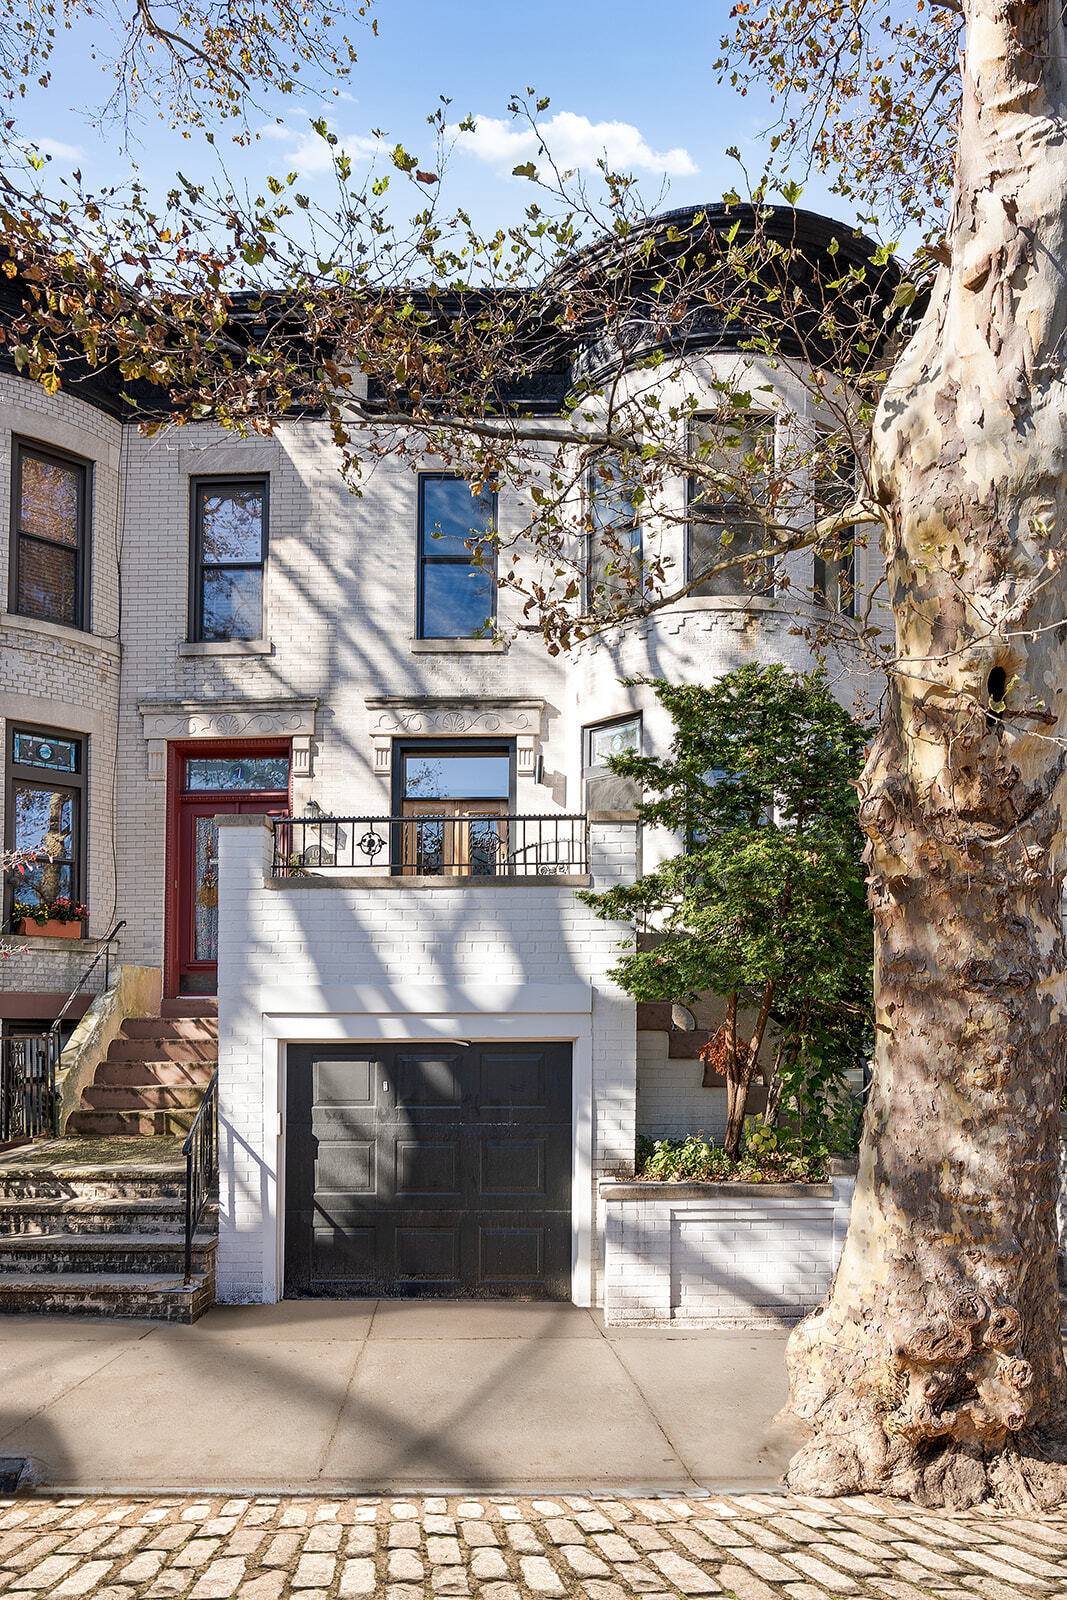 PRIVATE PARKING YOUR OWN ONE CAR GARAGE Nestled in the heart of Bay Ridge, Brooklyn, 6 Bay Ridge Place embodies the charm of urban living with the comfort of a ...